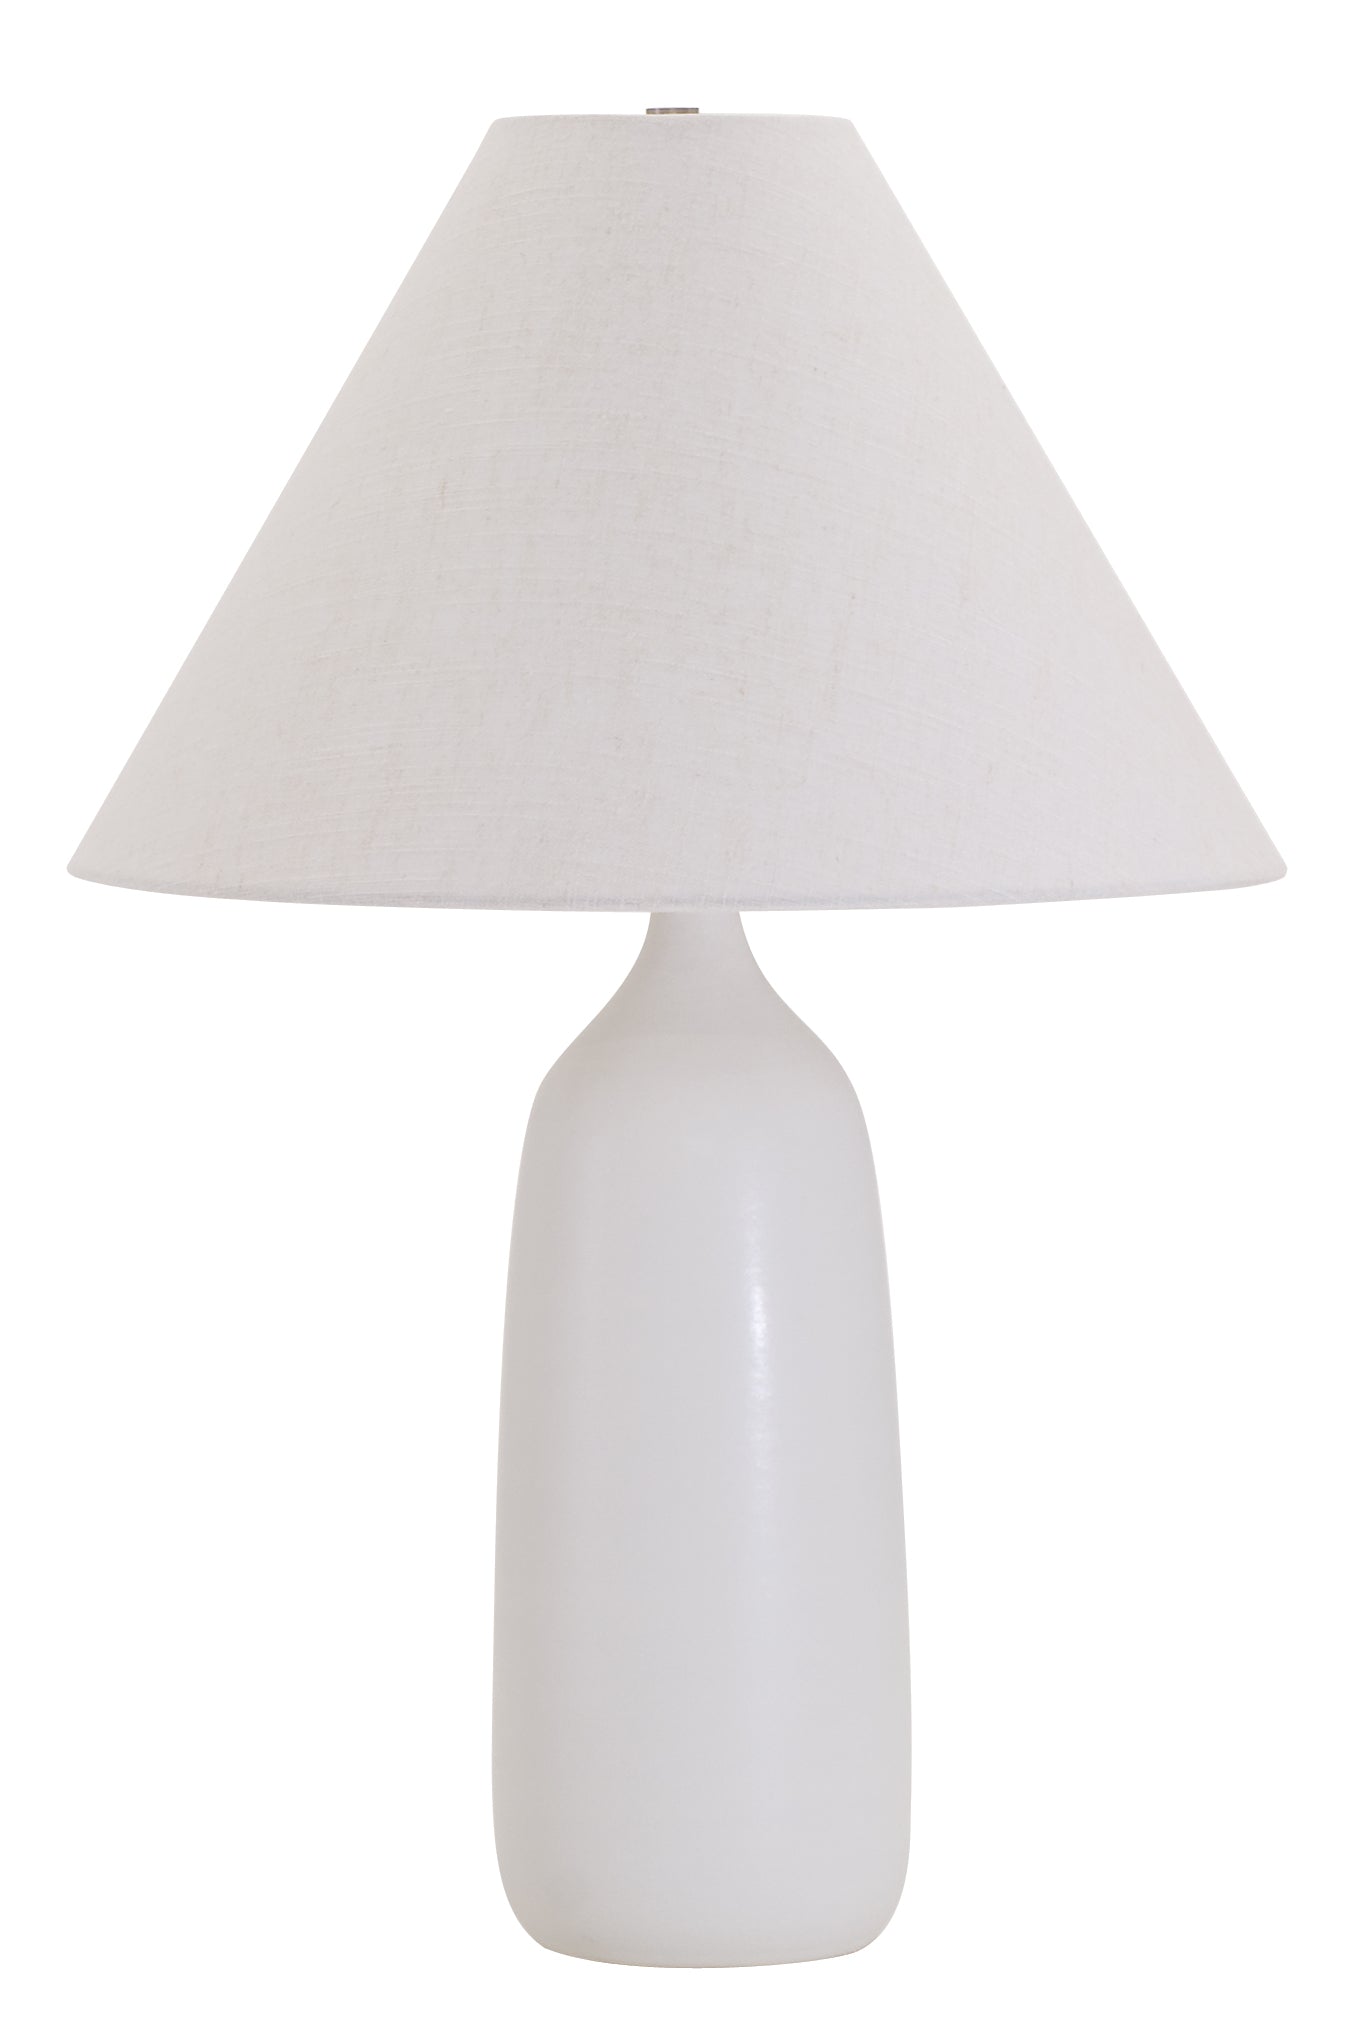 House of Troy Scatchard 25" Stoneware Table Lamp in White Matte GS100-WM